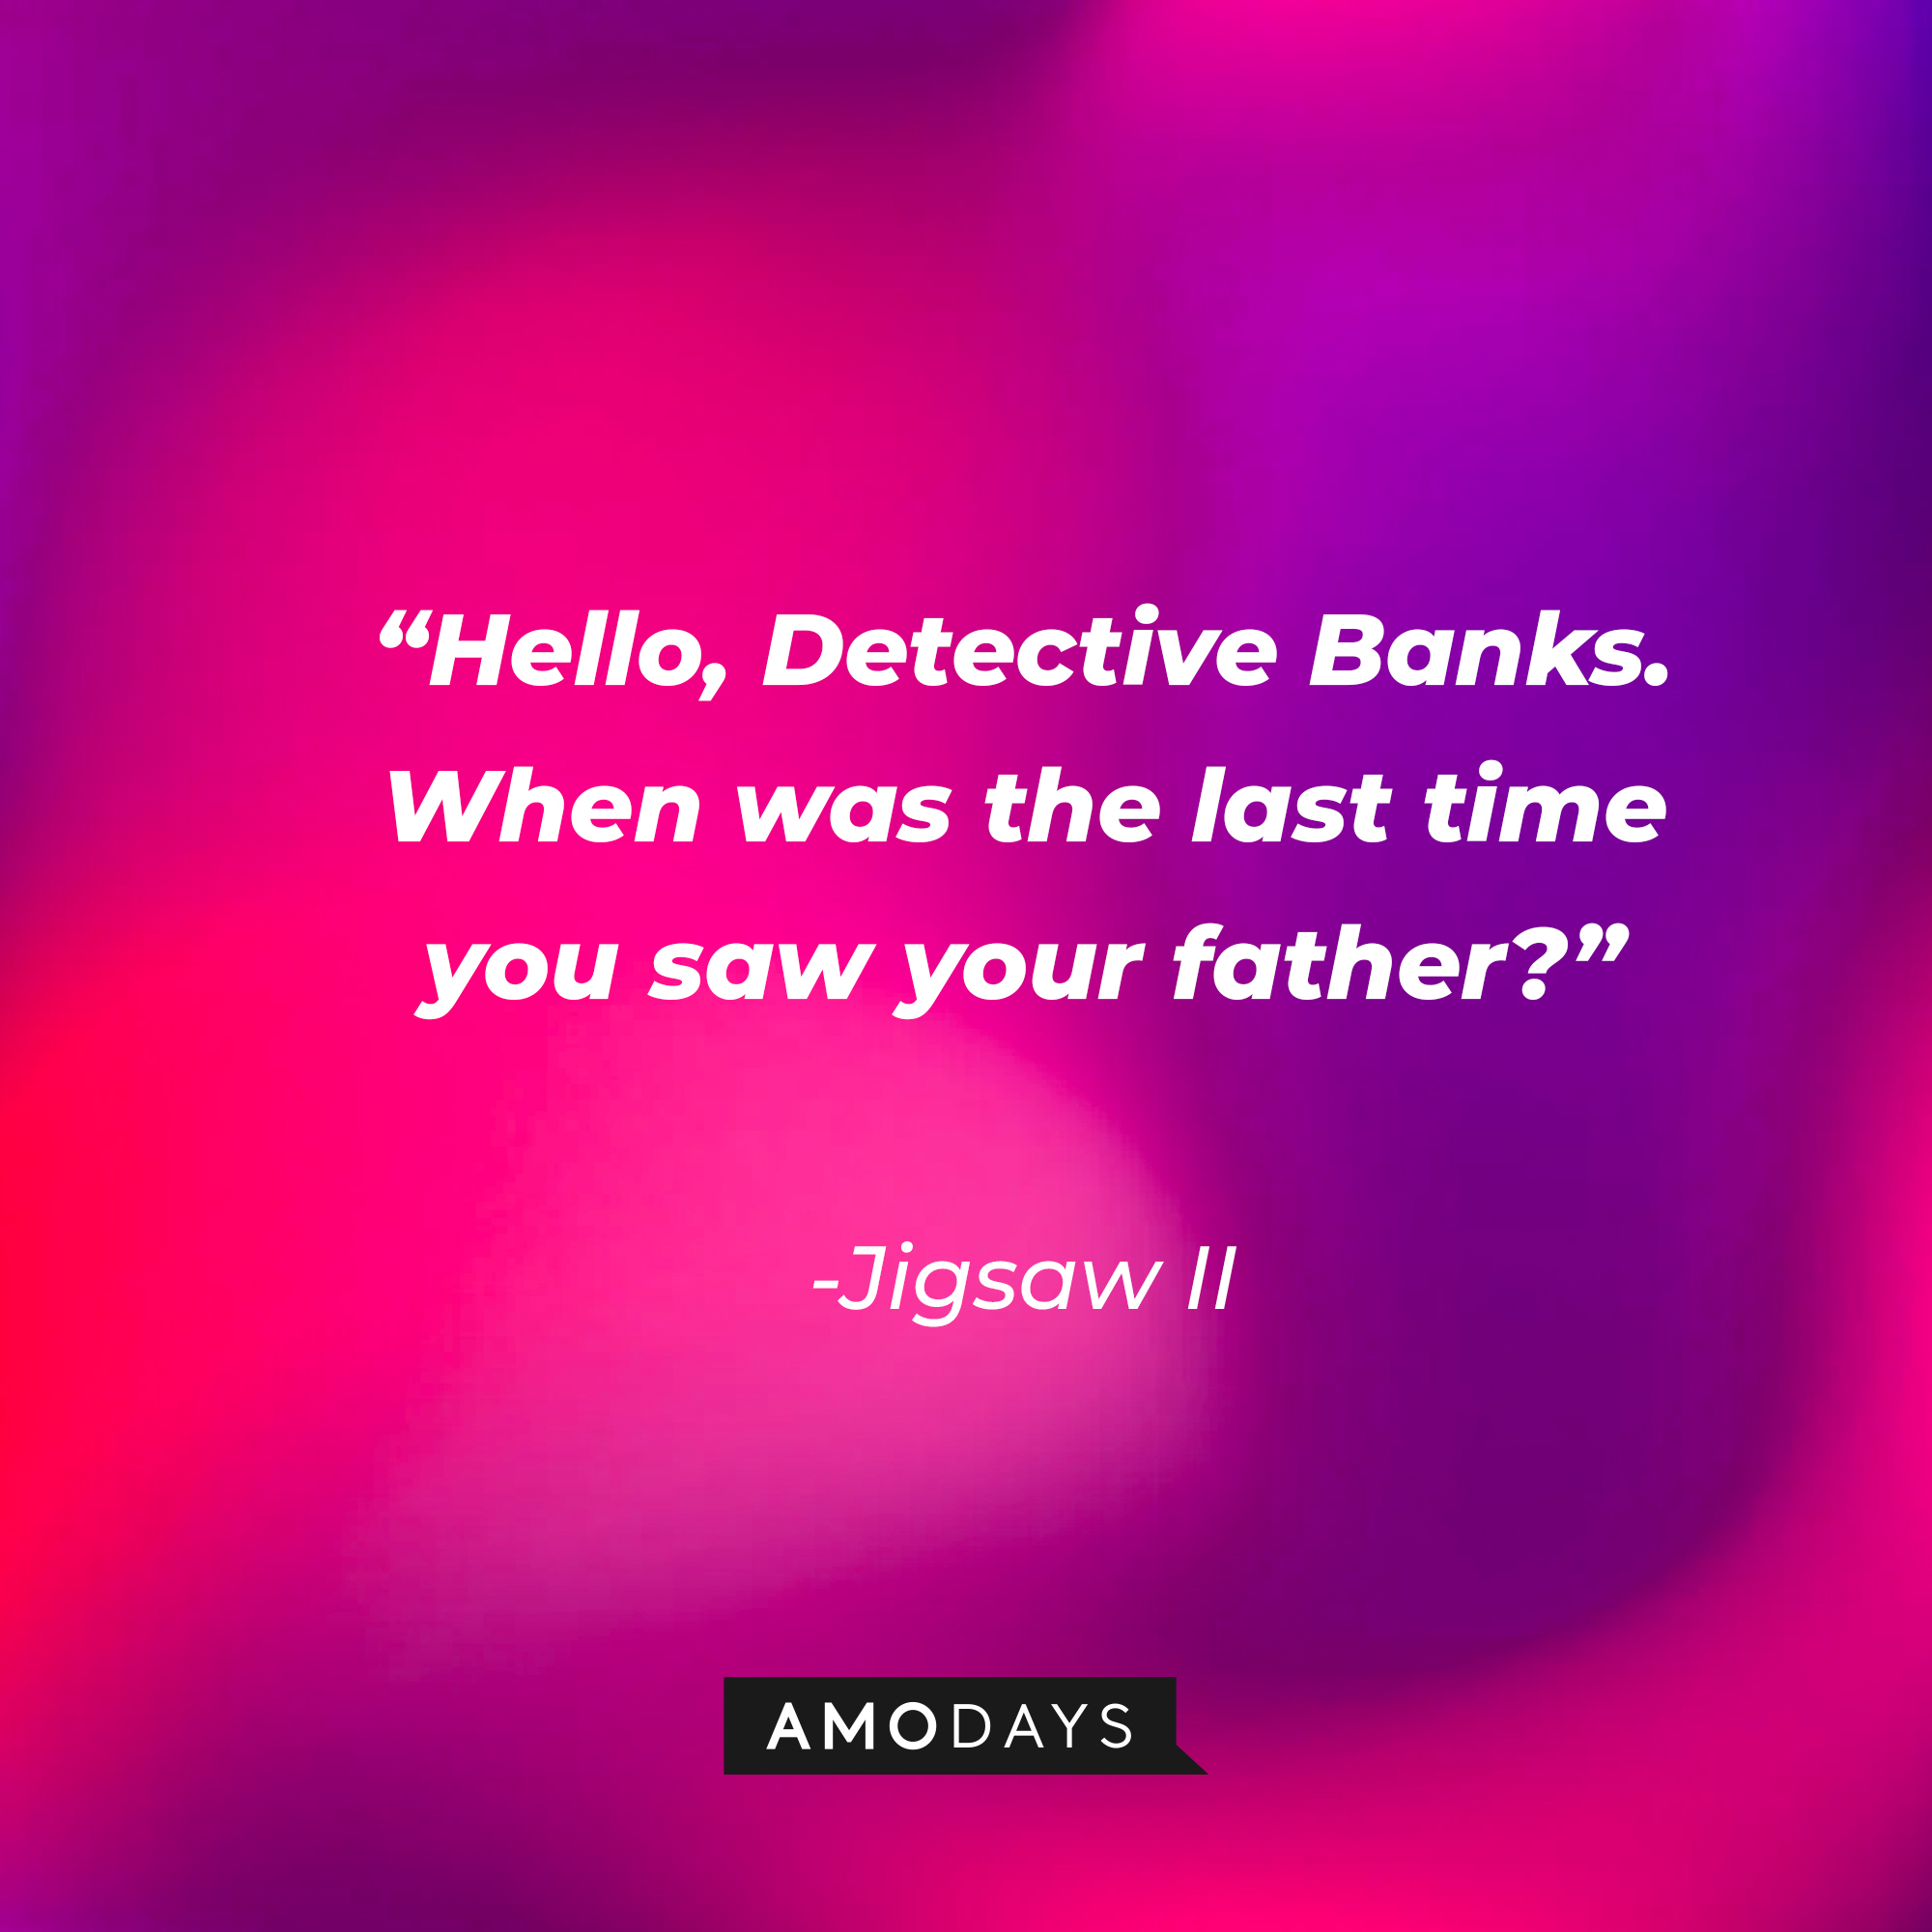 Jigsaw II's quote: “Hello, Detective Banks. When was the last time you saw your father?” | Source: Amodays